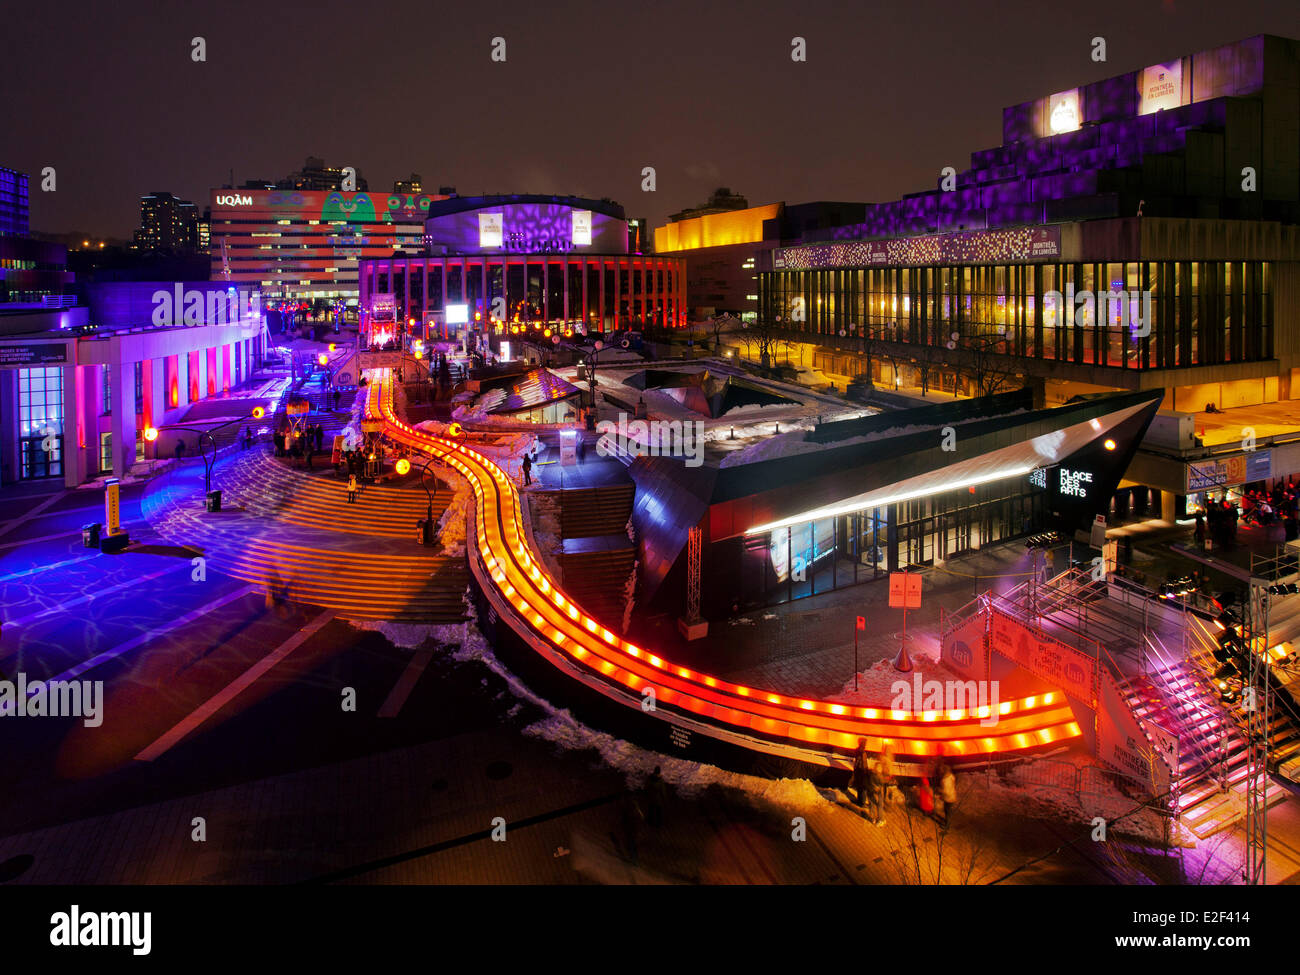 Canada, Quebec province, Montreal, Montreal en Lumiere festival, giant slide Stock Photo